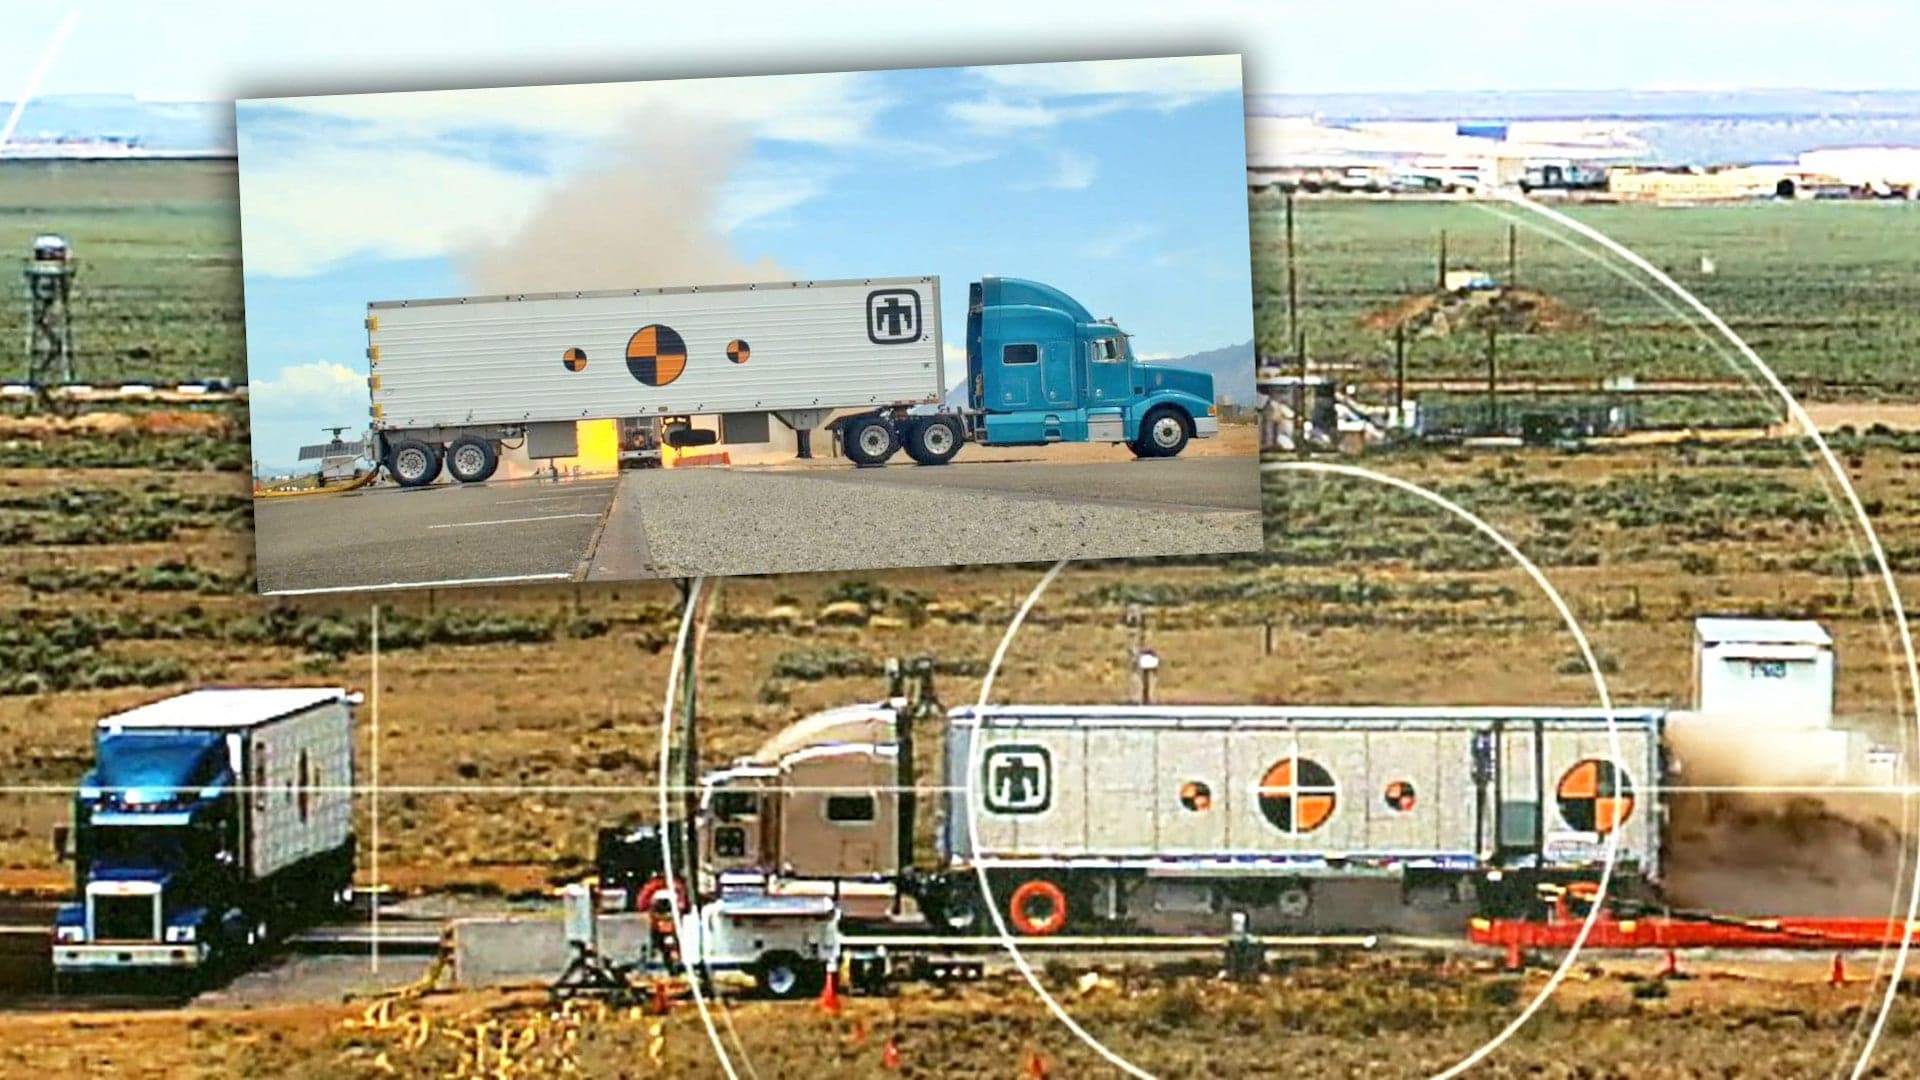 New Nuke Transporting Tractor Trailer Tested By Launching Another Semi At It Using Rockets